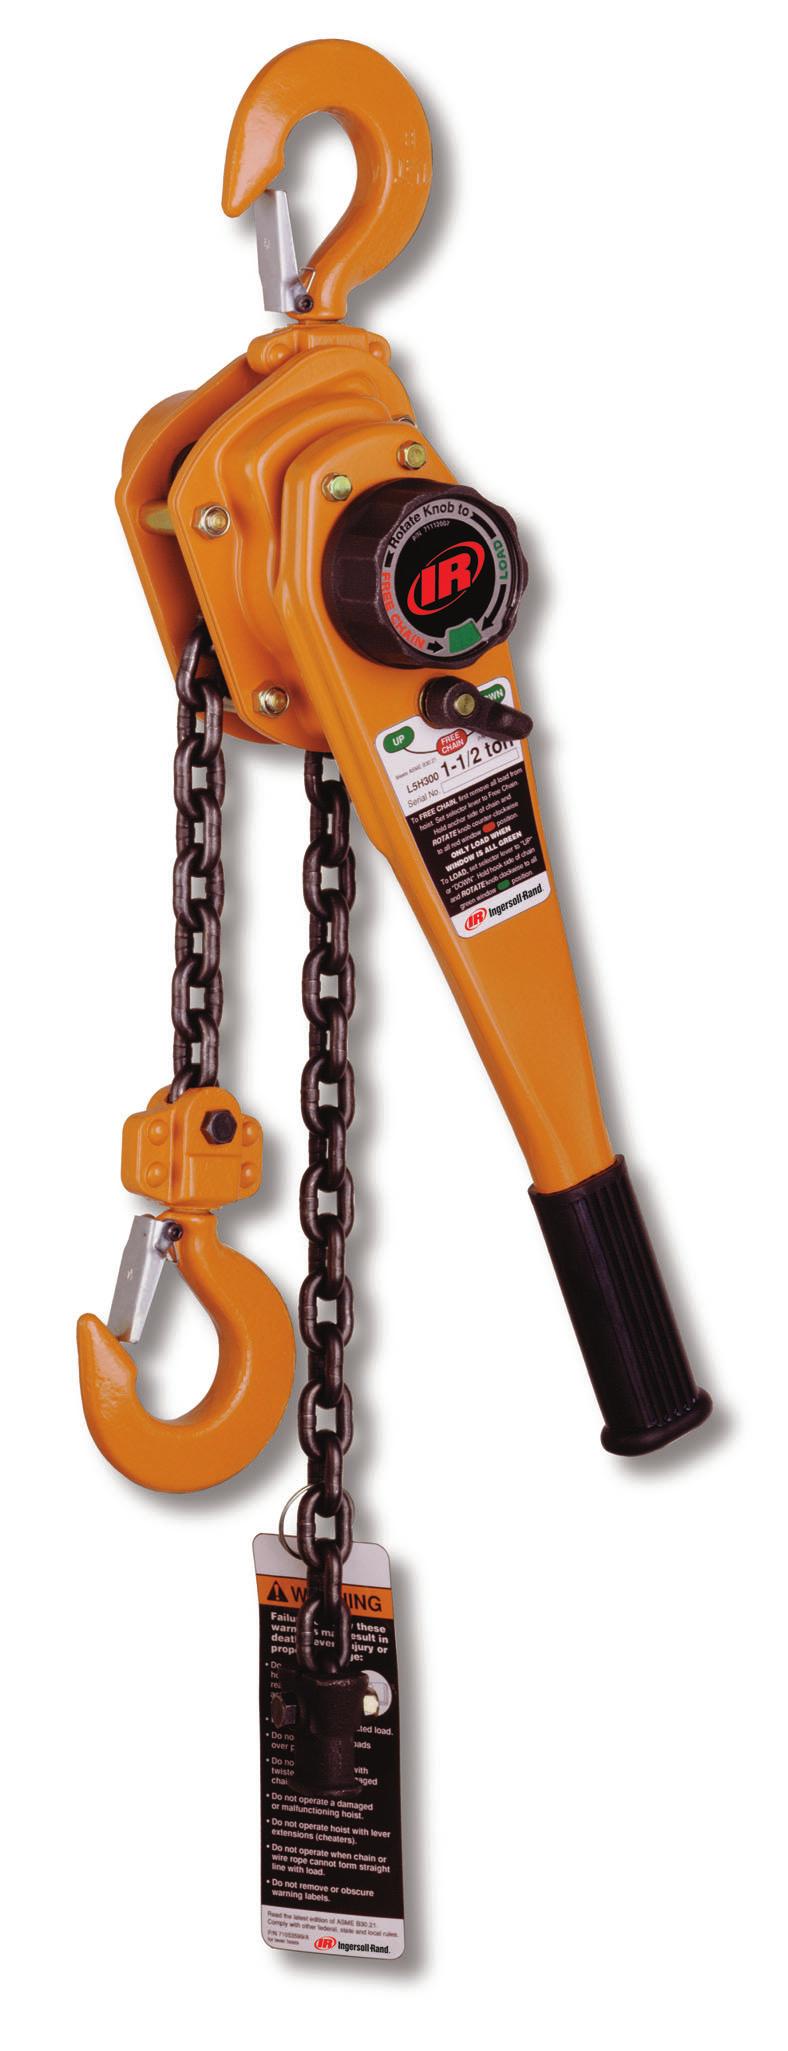 FR CHIN L5H Premium Series Lever Chain Hoist 3/4 6 metric ton Line Pull Capacity Features Our top of the line lever chain hoist. The ultimate in performance, endurance.